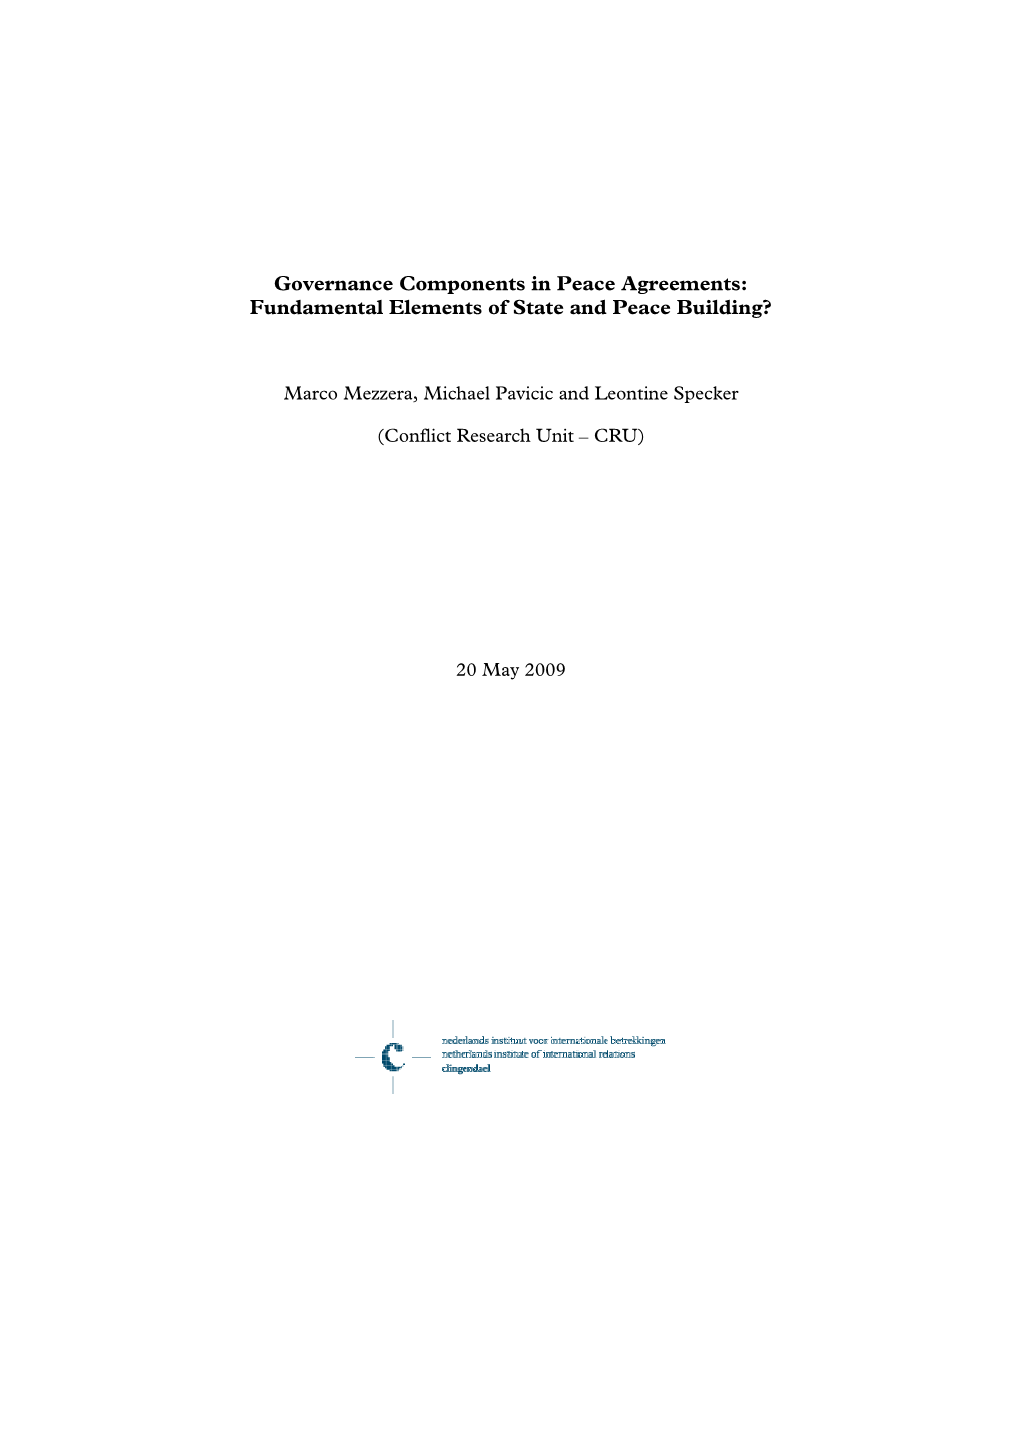 090520 Governance Components in Peace Agreements Final